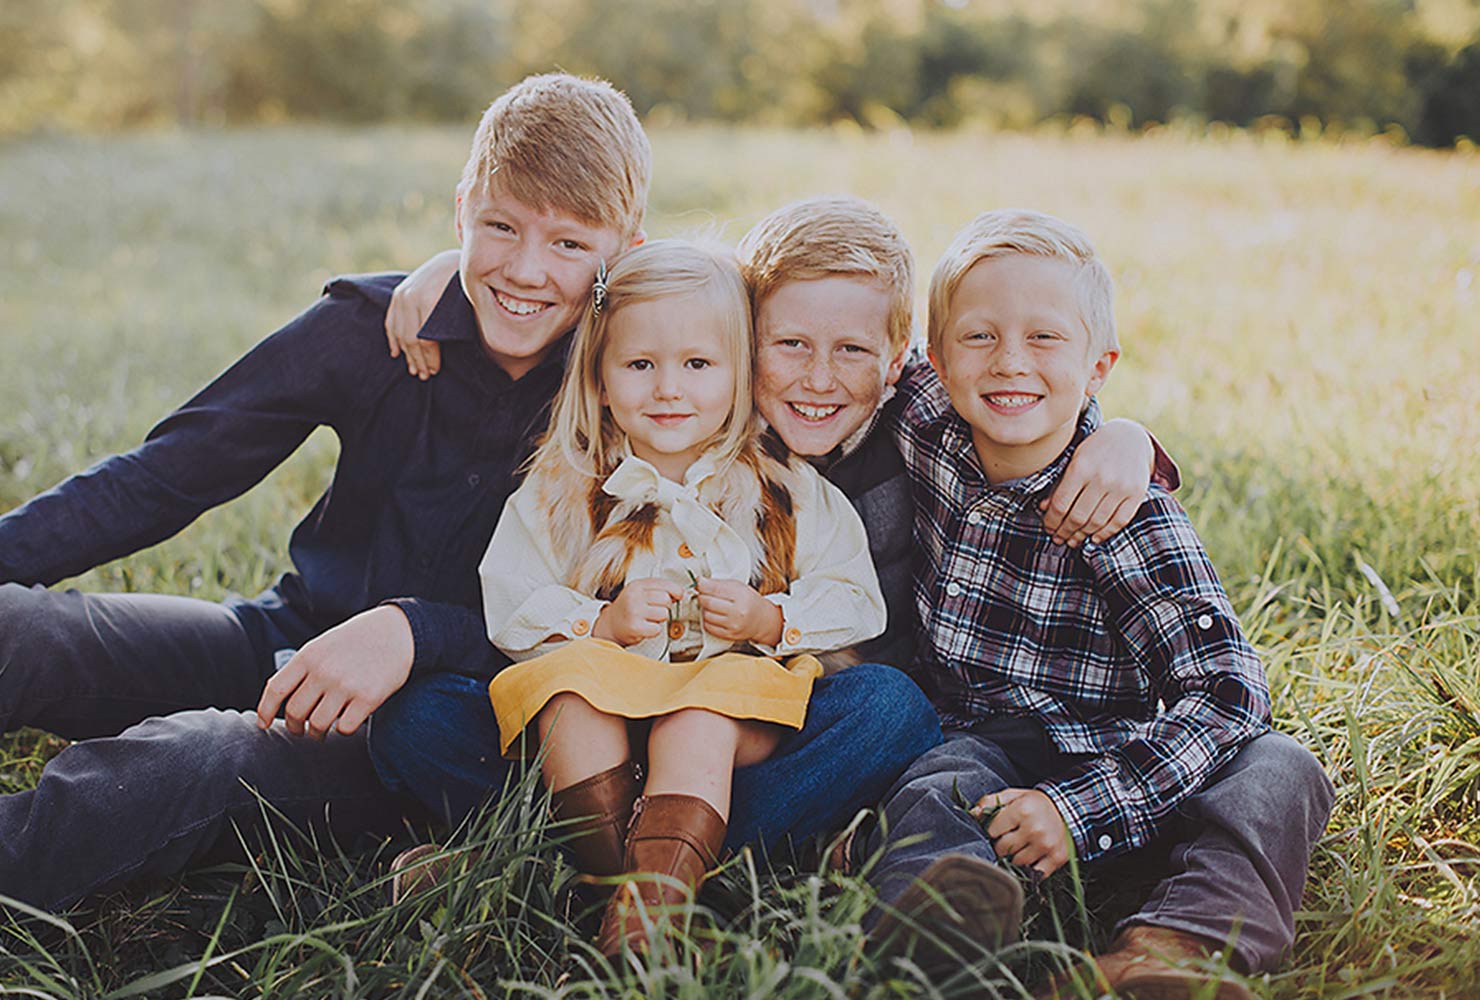 sibling photo ideas fall outfits grass